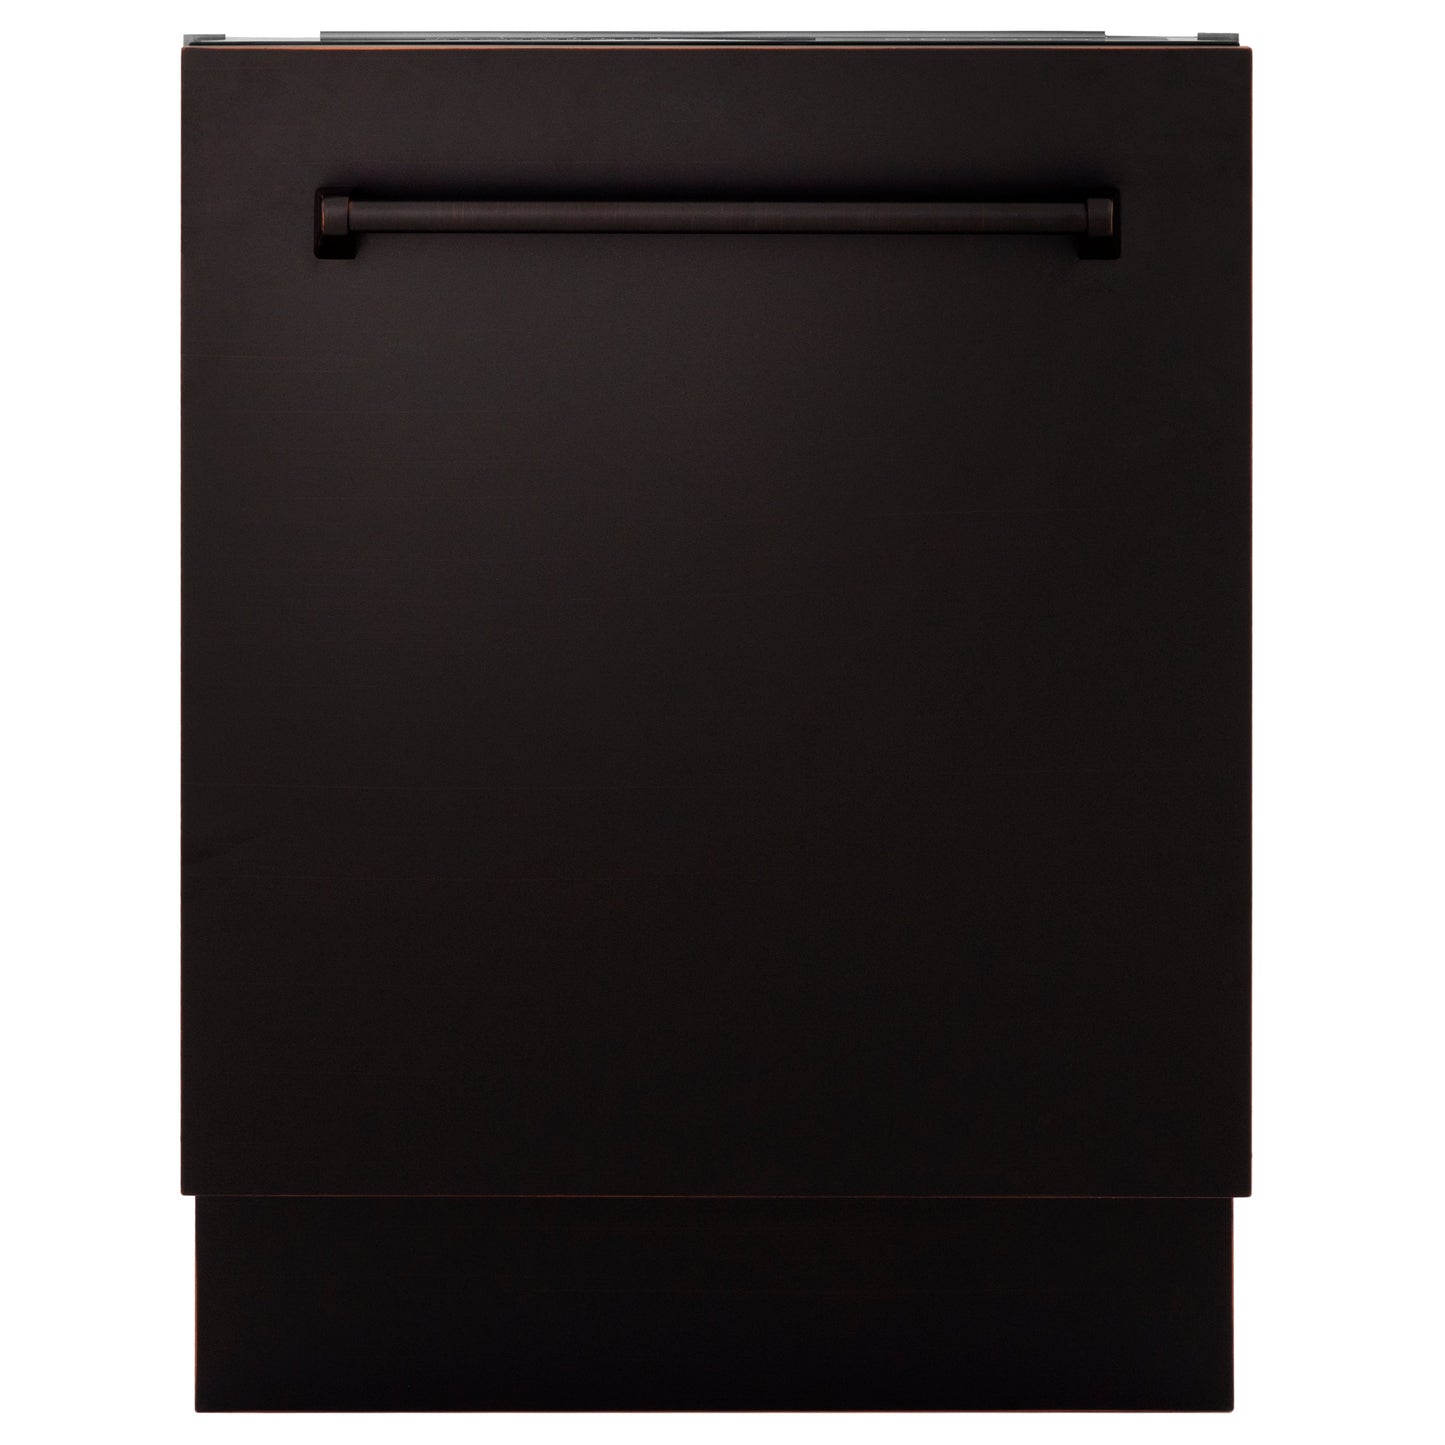 ZLINE 24" Tallac Series 3rd Rack Dishwasher with Oil-Rubbed Bronze Panel and Traditional Handle, 51dBa (DWV-ORB-24)